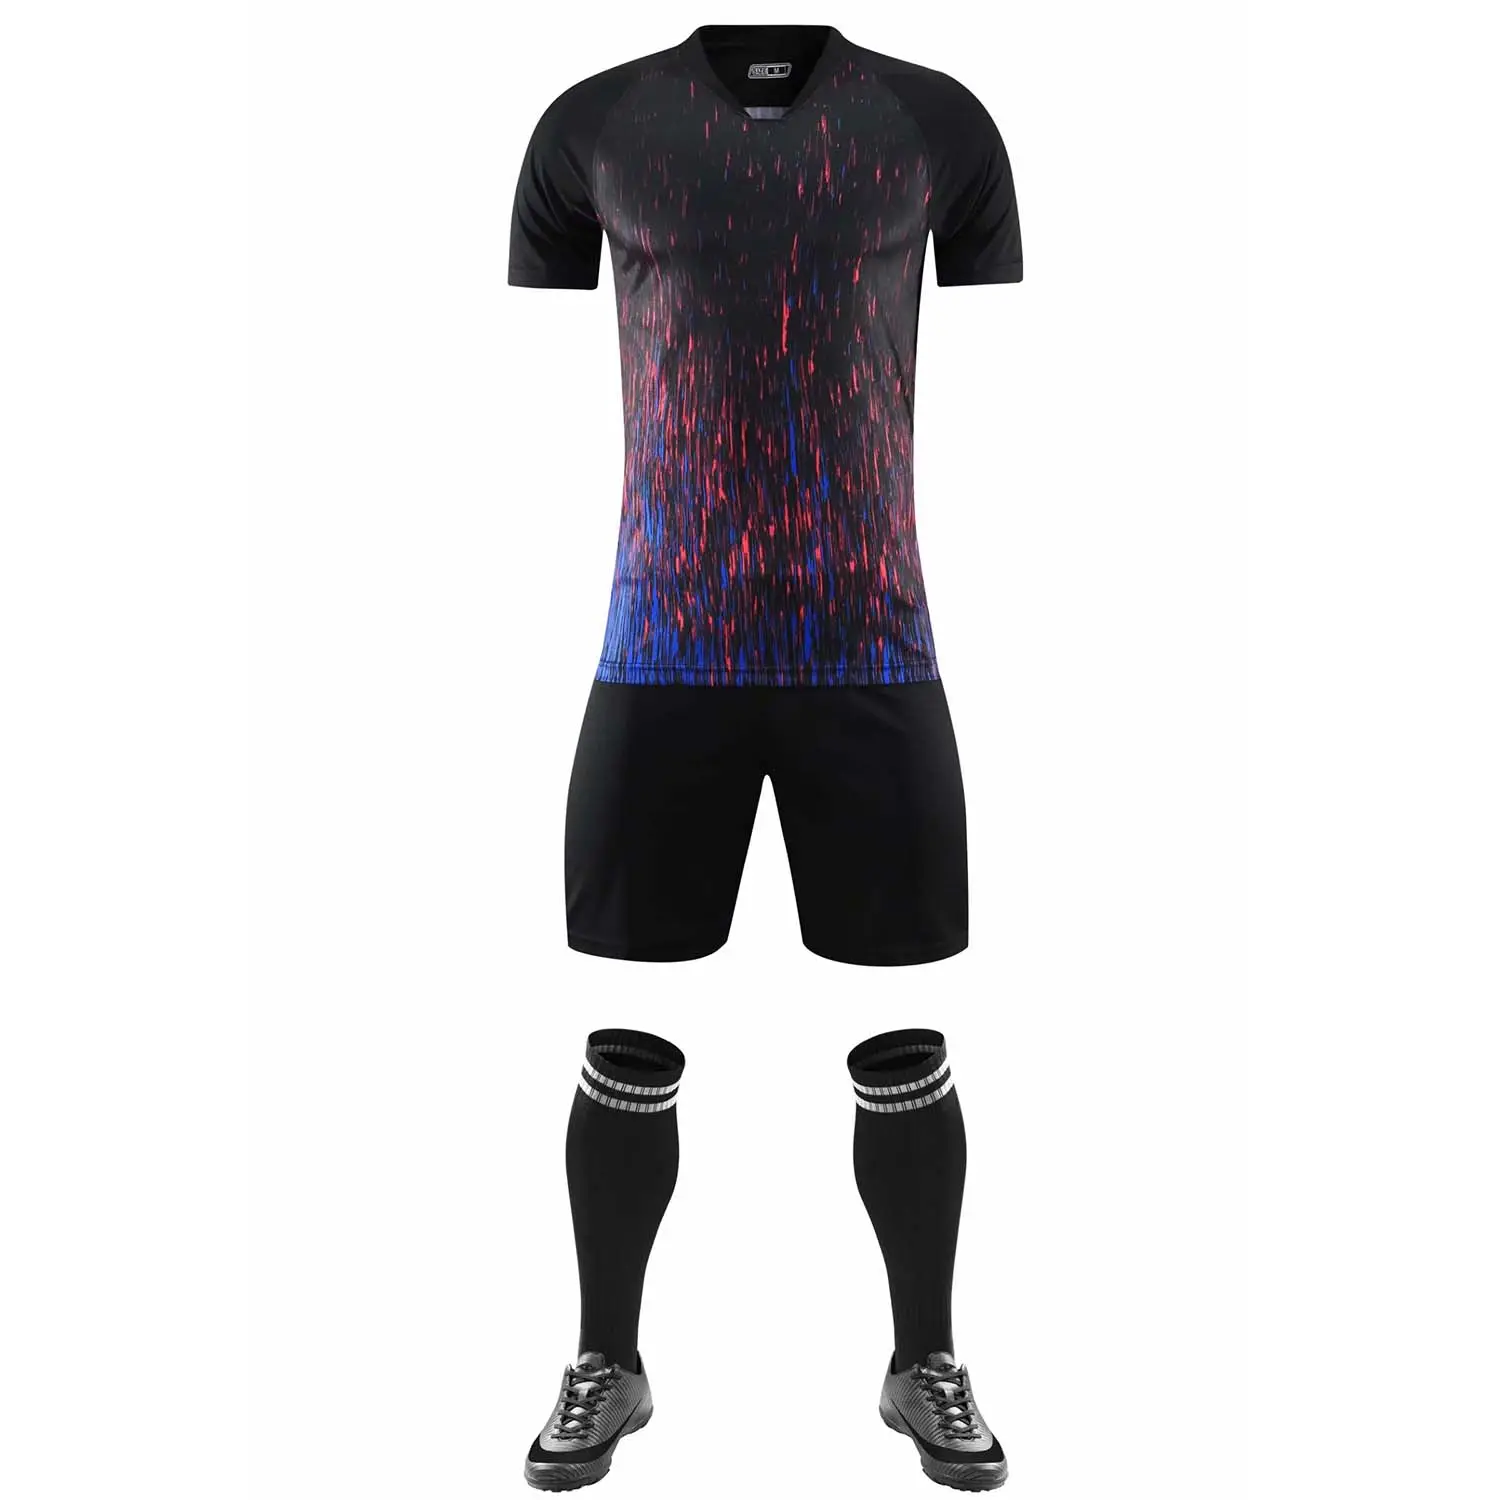 Youth adult latest design kit custom made soccer uniform, top quality dyeable sublimation soccer uniform jersey with short kit